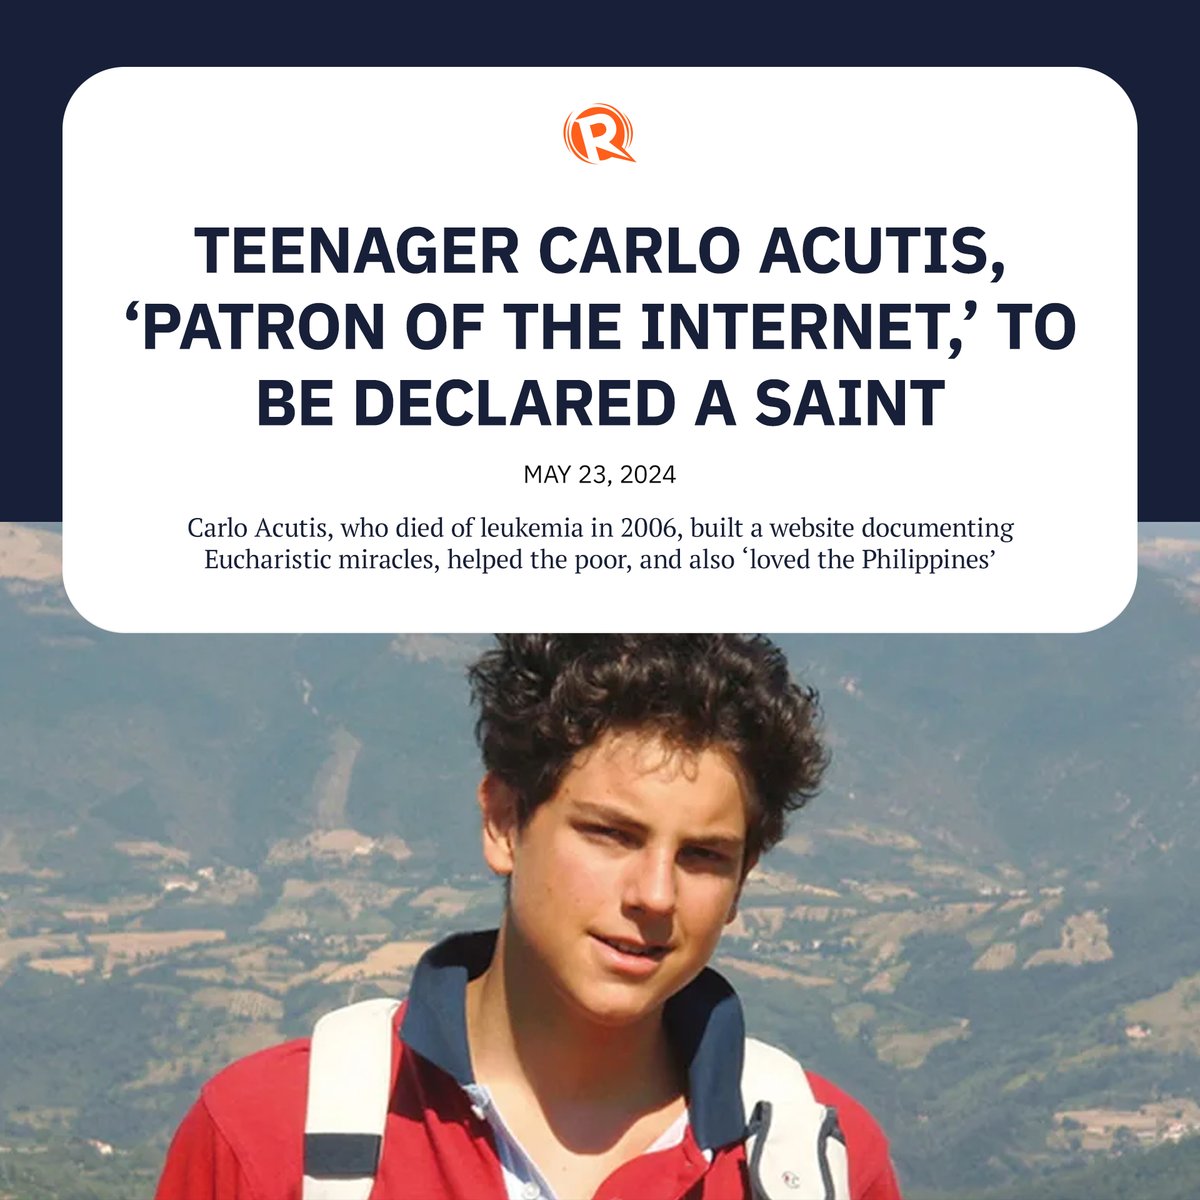 Italian teenager Carlo Acutis, who died of leukemia at the age of 15, will be declared a Catholic saint after a miracle was attributed to his intercession, the Vatican confirmed on Thursday, May 23. trib.al/3OozPlH